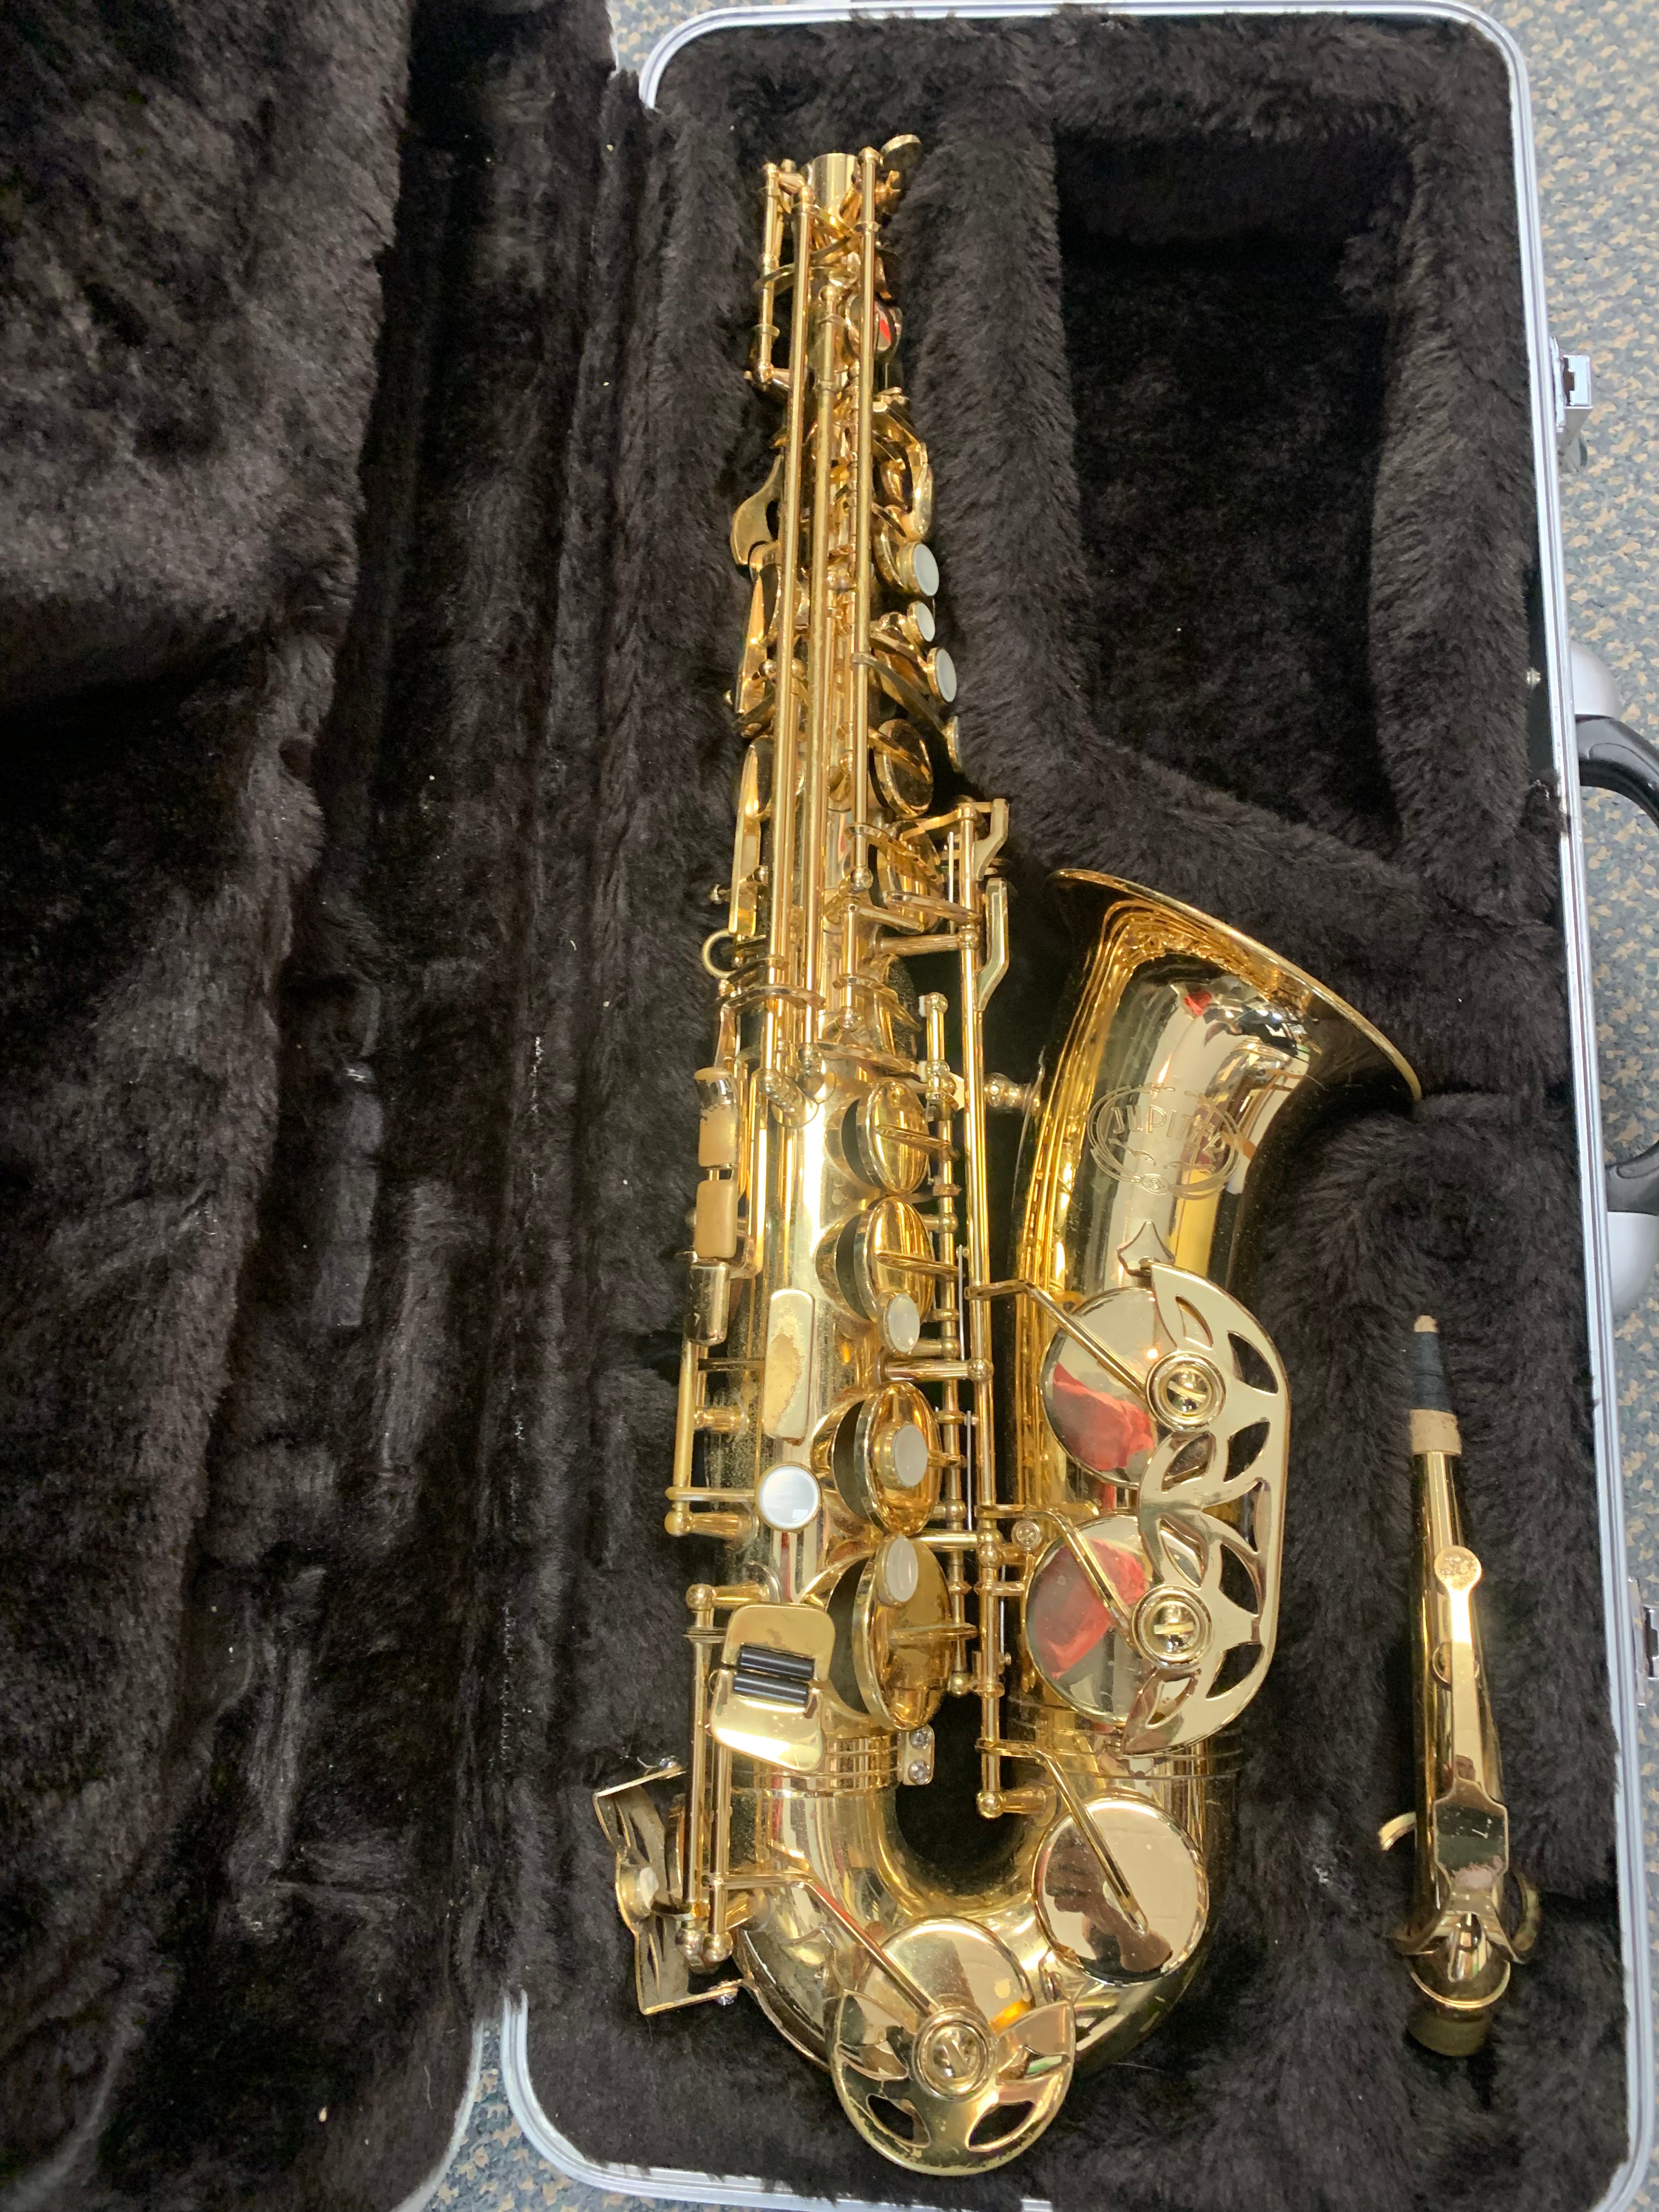 USED JUPITER ALTO SAXOPHONE AS IS WITH CASE